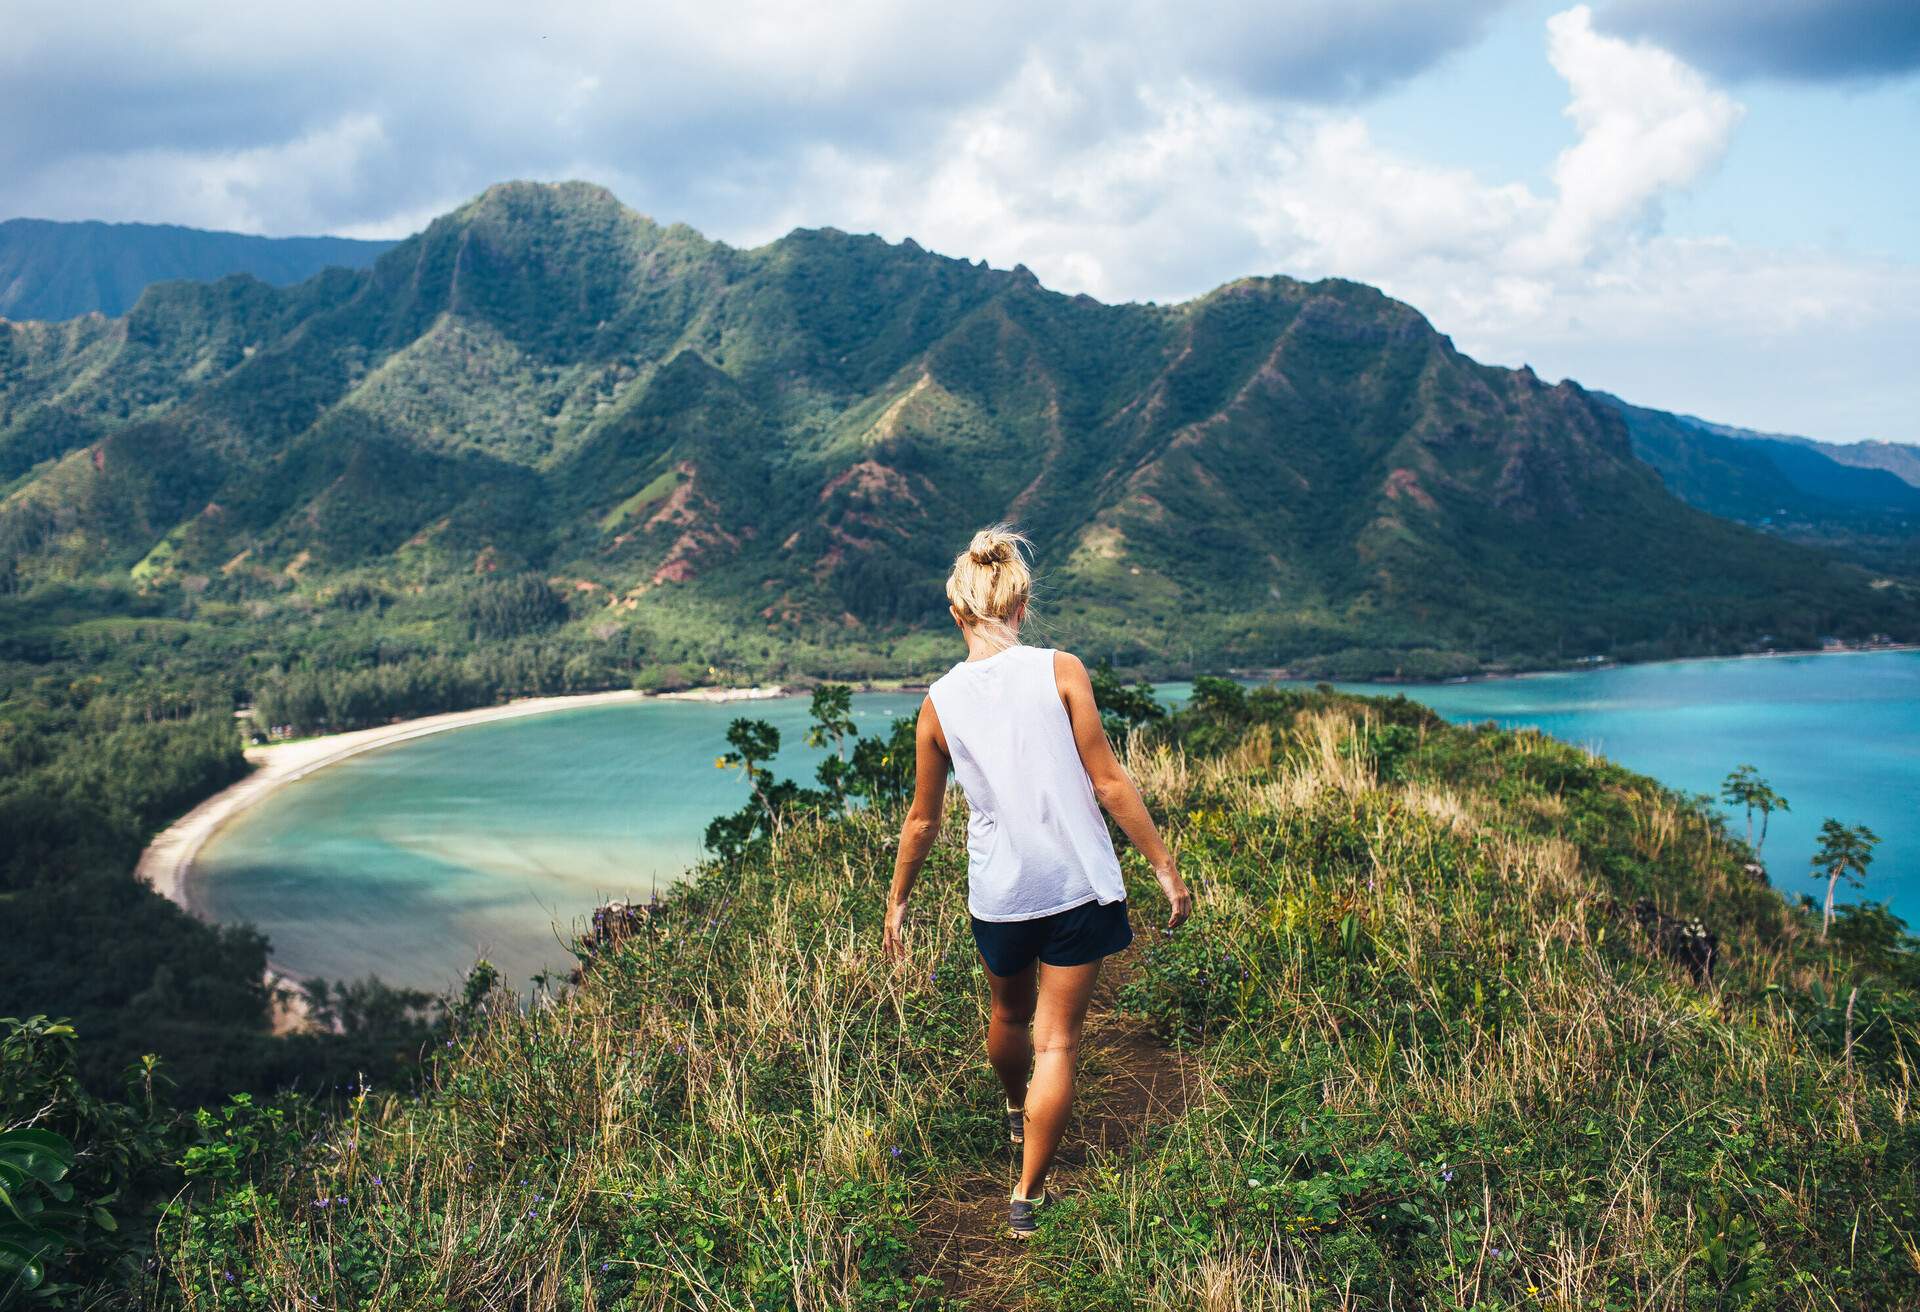 A woman walking toward the hilltop overlooking a beach with milky blue water.